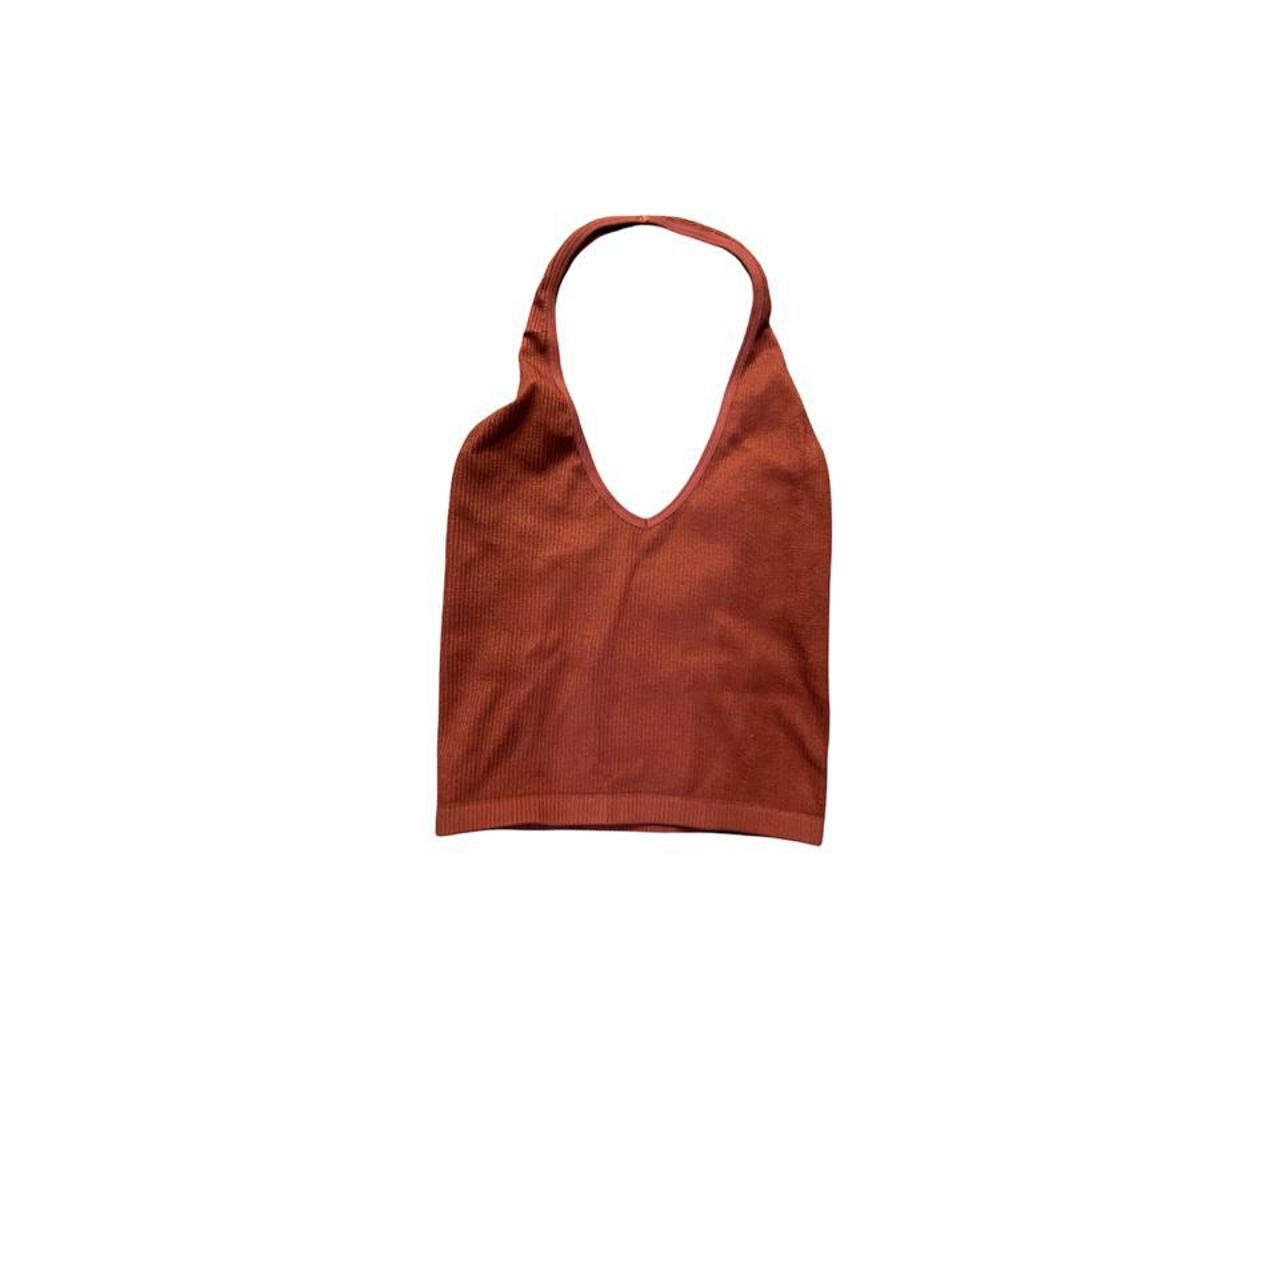 Urban Outfitters Women's Burgundy and Orange Vest